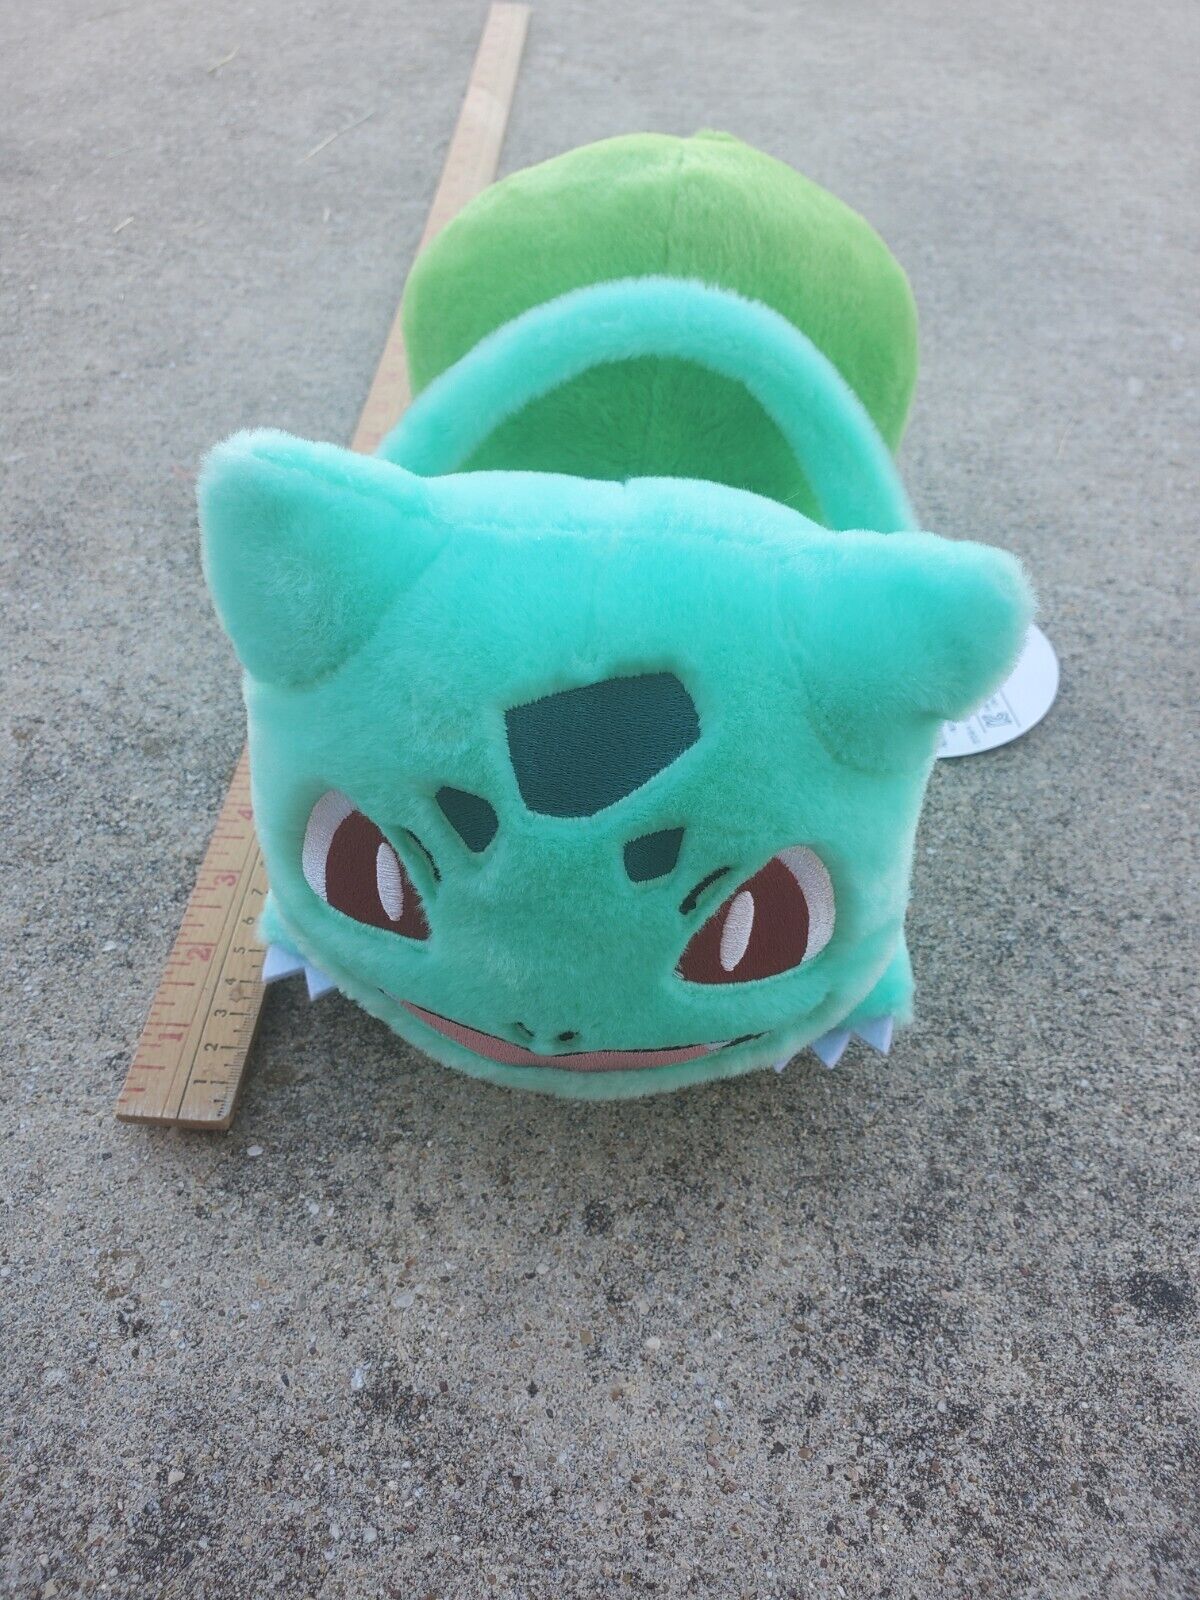 a plush of bulbasaur, a pokemon. bulbasaur is a small teal frog-like creature with dark teal spots on it's body, triangular red eyes, a wide smile, and a large green plant bulb growing on it's back. the plush has a zipper compartment in front of the bulb.